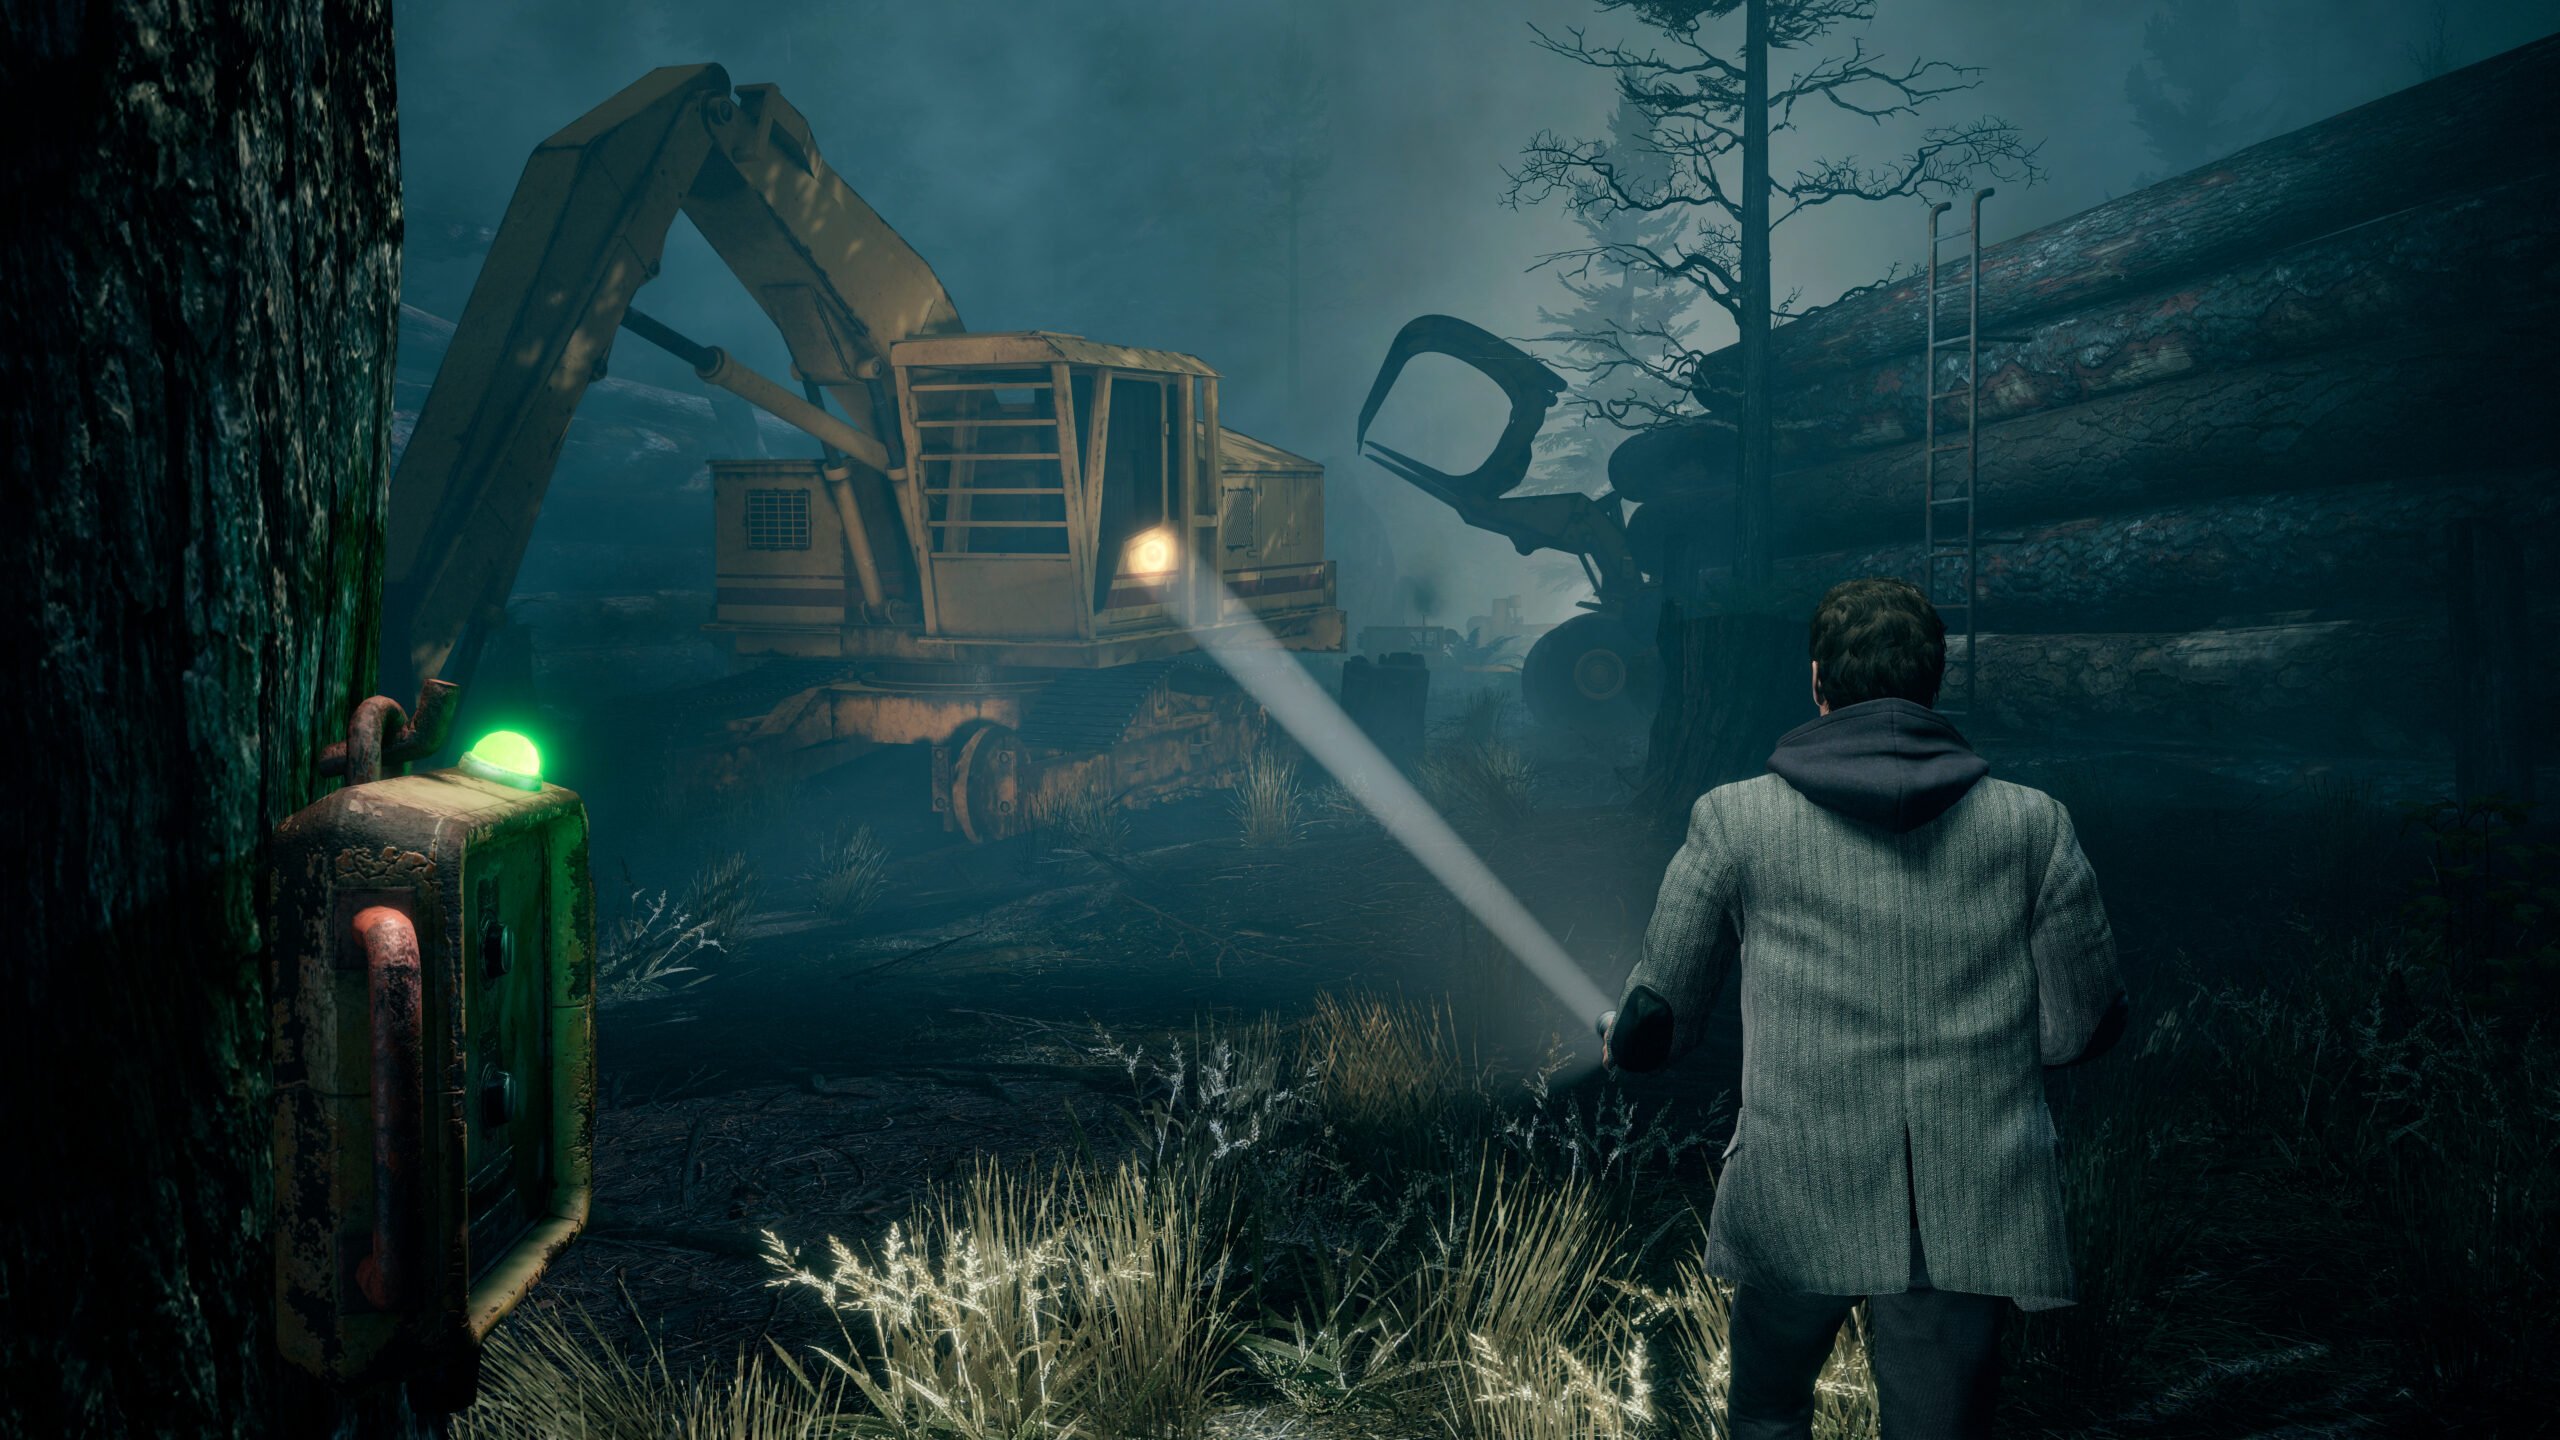 Alan Wake Remastered is out now for Nintendo Switch